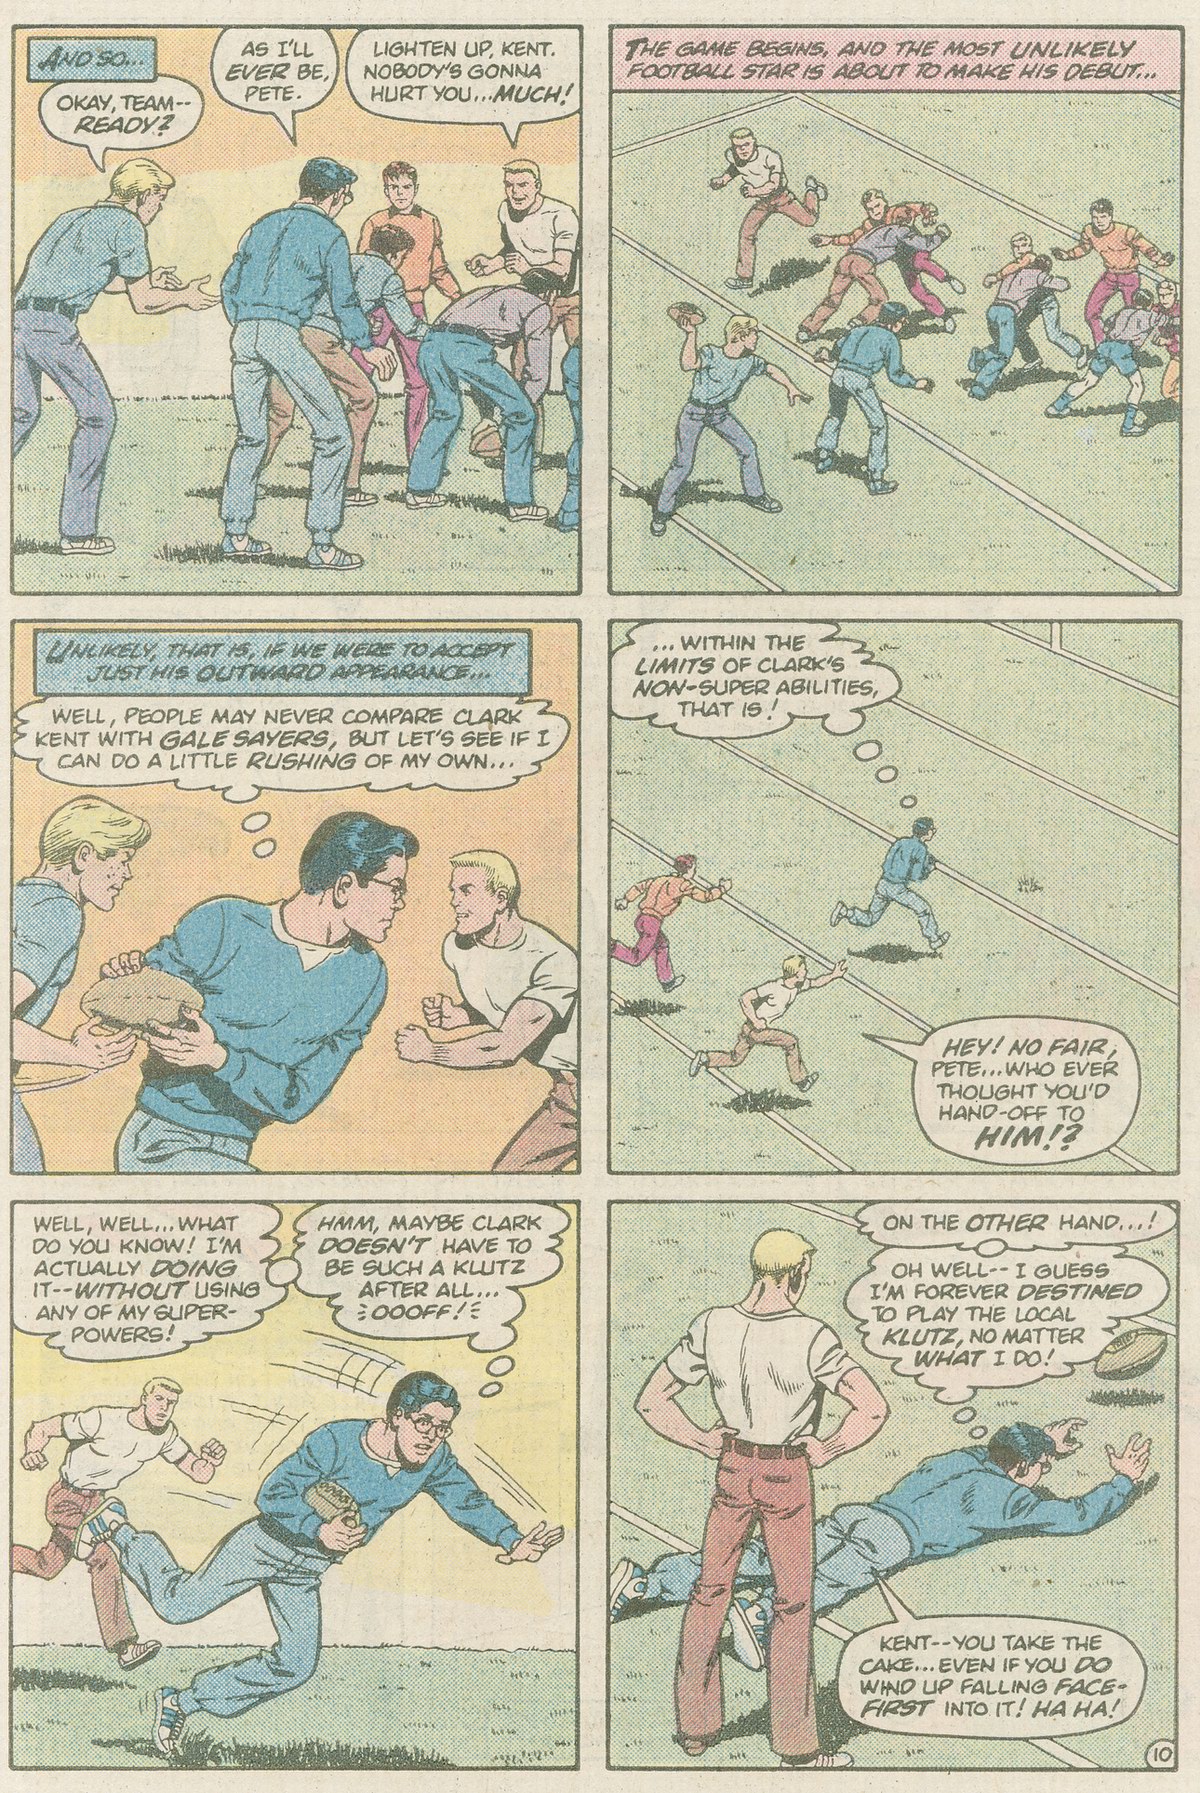 The New Adventures of Superboy 36 Page 10